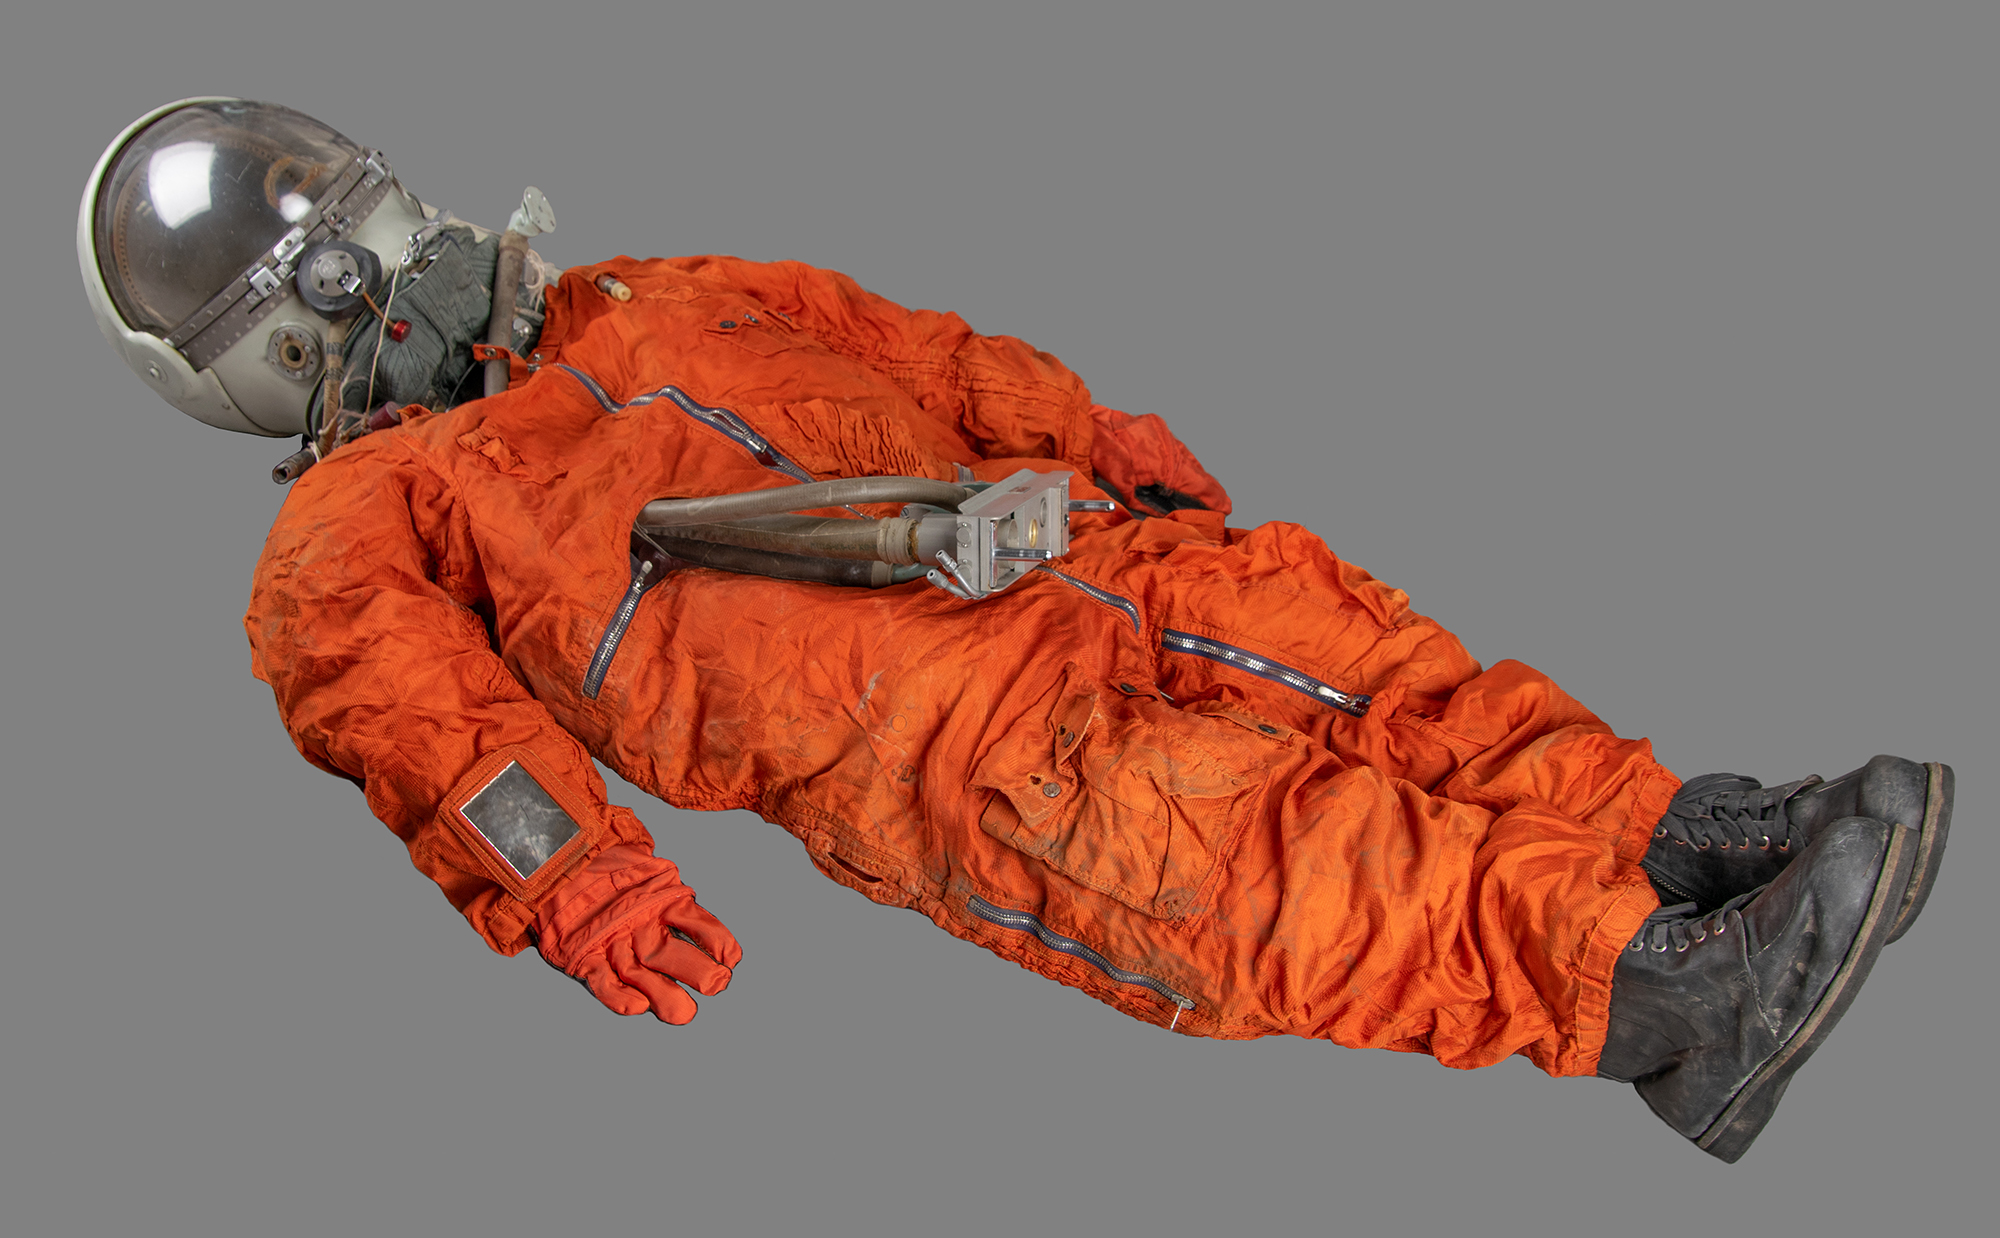 Lot #9617 Cosmonaut SK-1 Vostok Suit Assembly Prototype or Display - Image 1